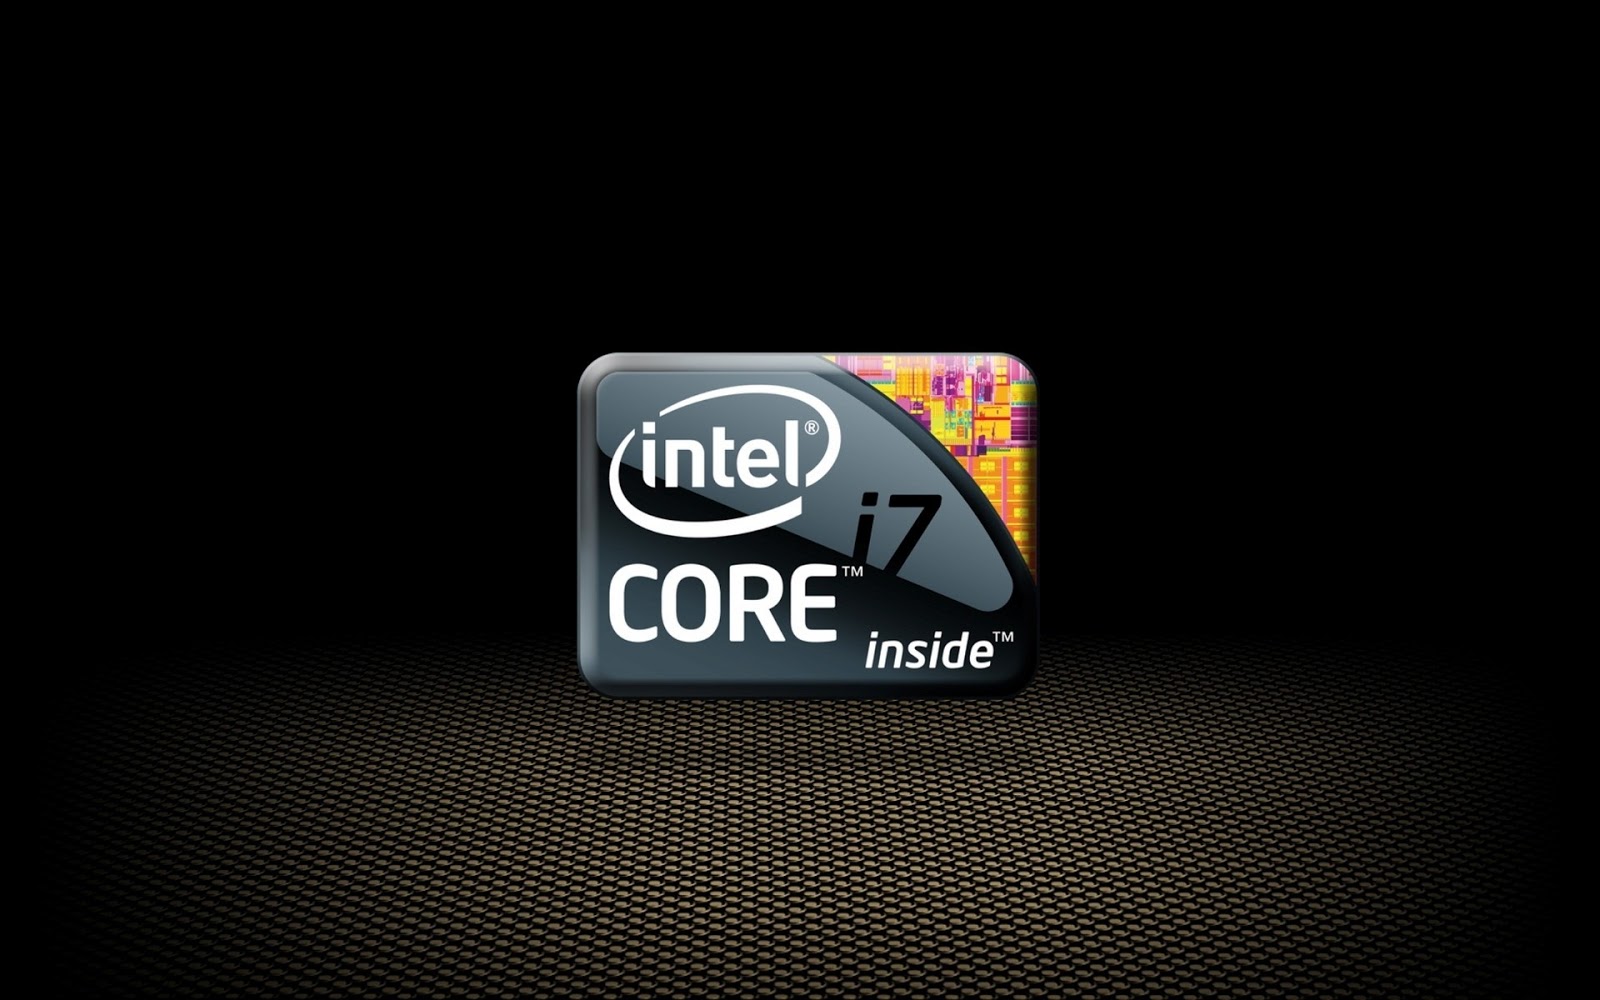 Intel Core i7 Extreme Edition Mystery Wallpaper